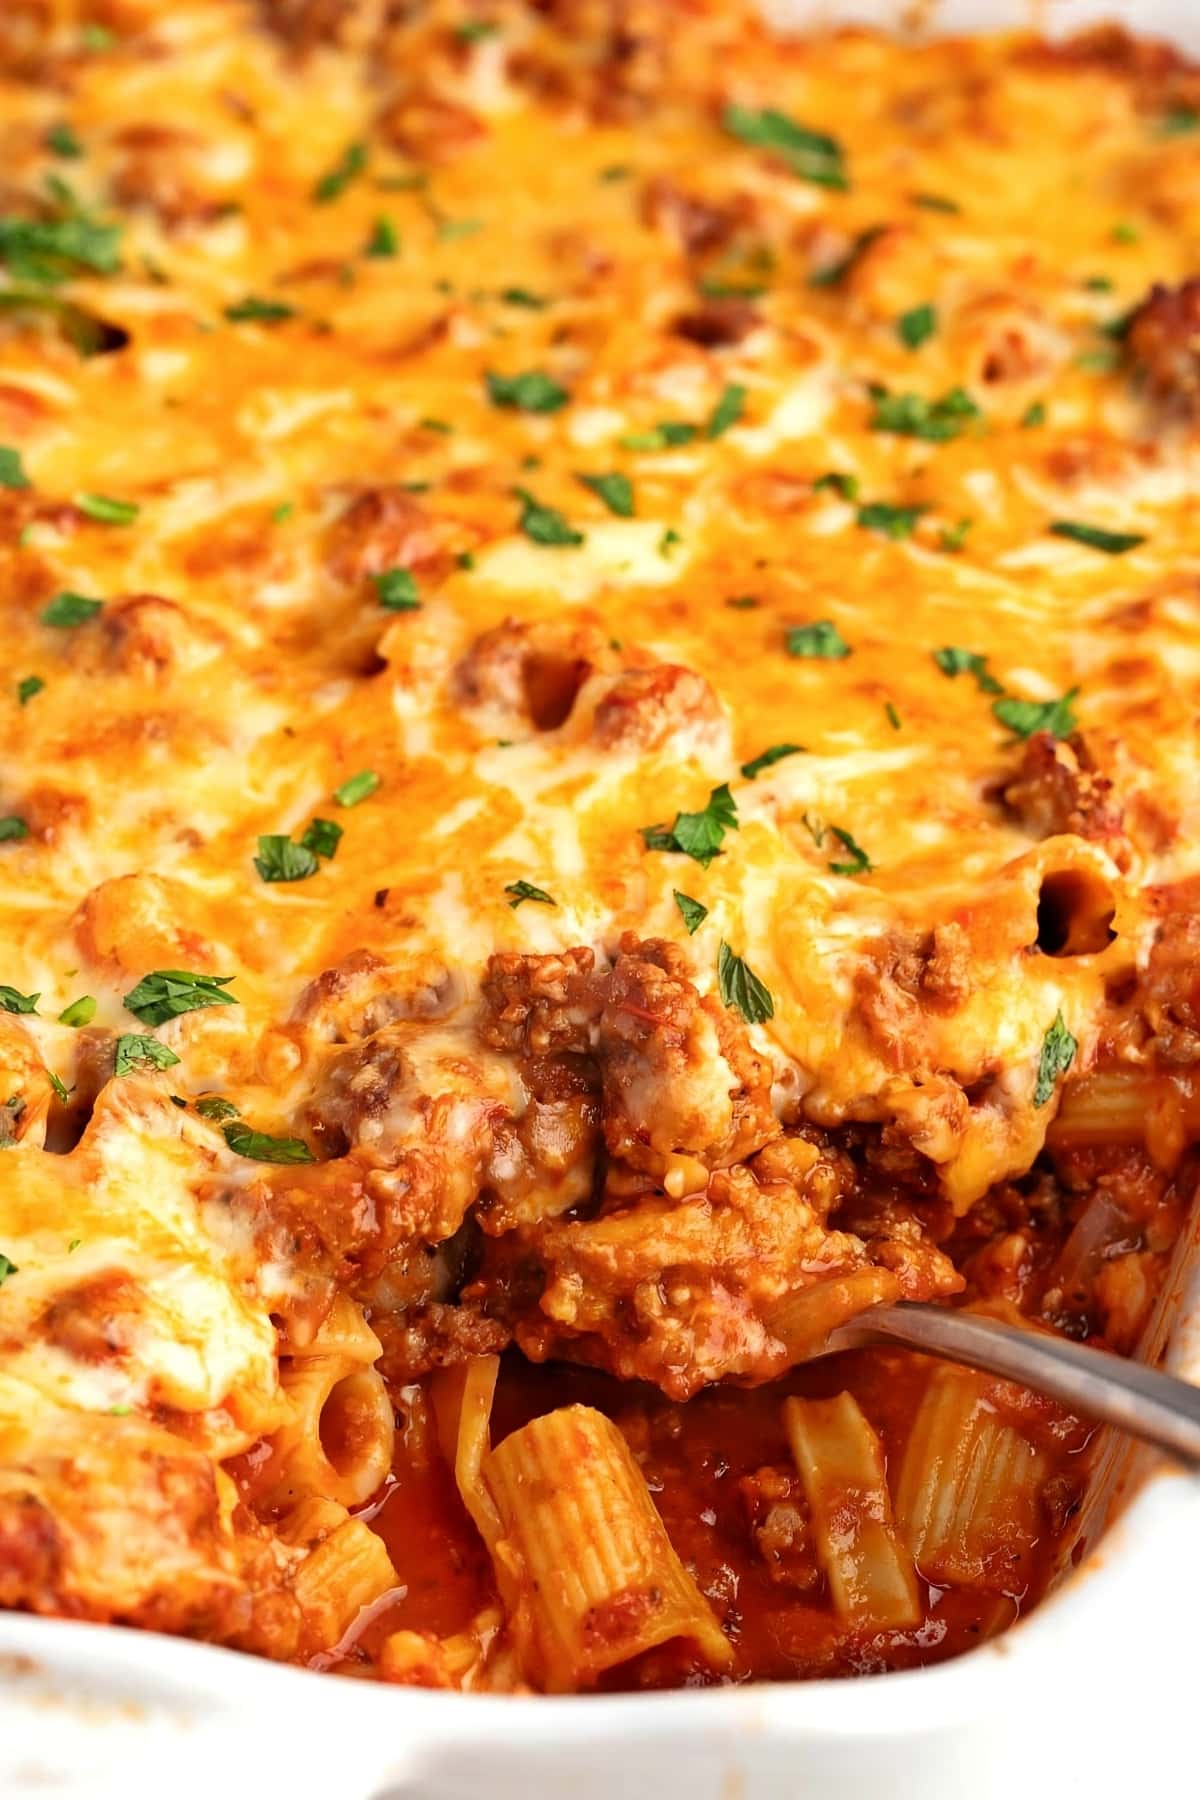 Homemade Cheesy and Meaty Baked Rigatoni with Ground Beef